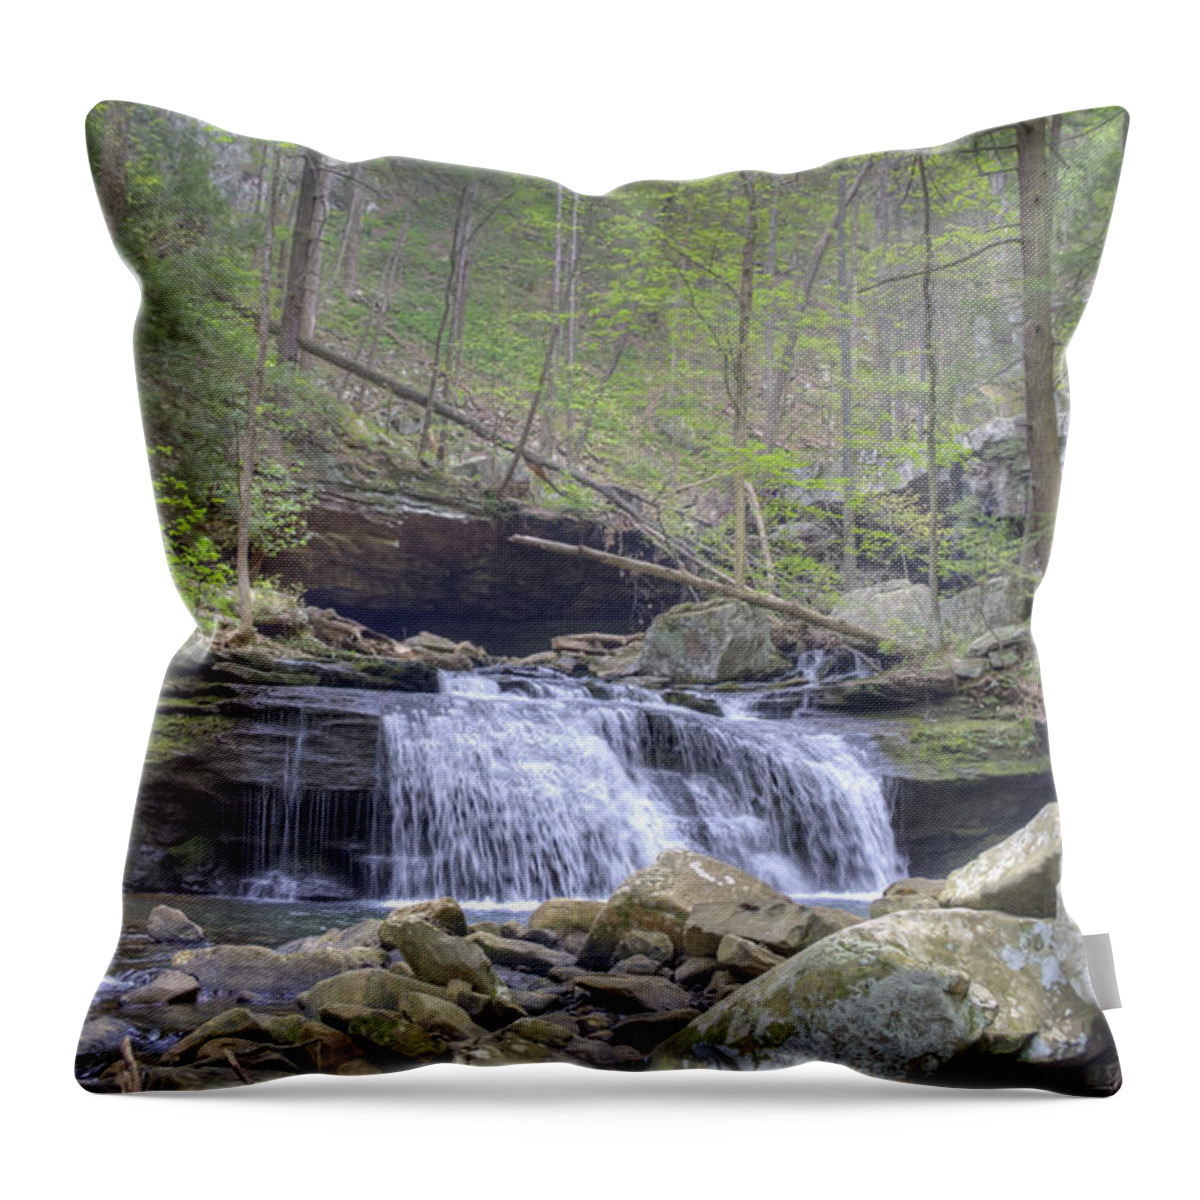 Waterfall Throw Pillow featuring the photograph Small Waterfall by David Troxel